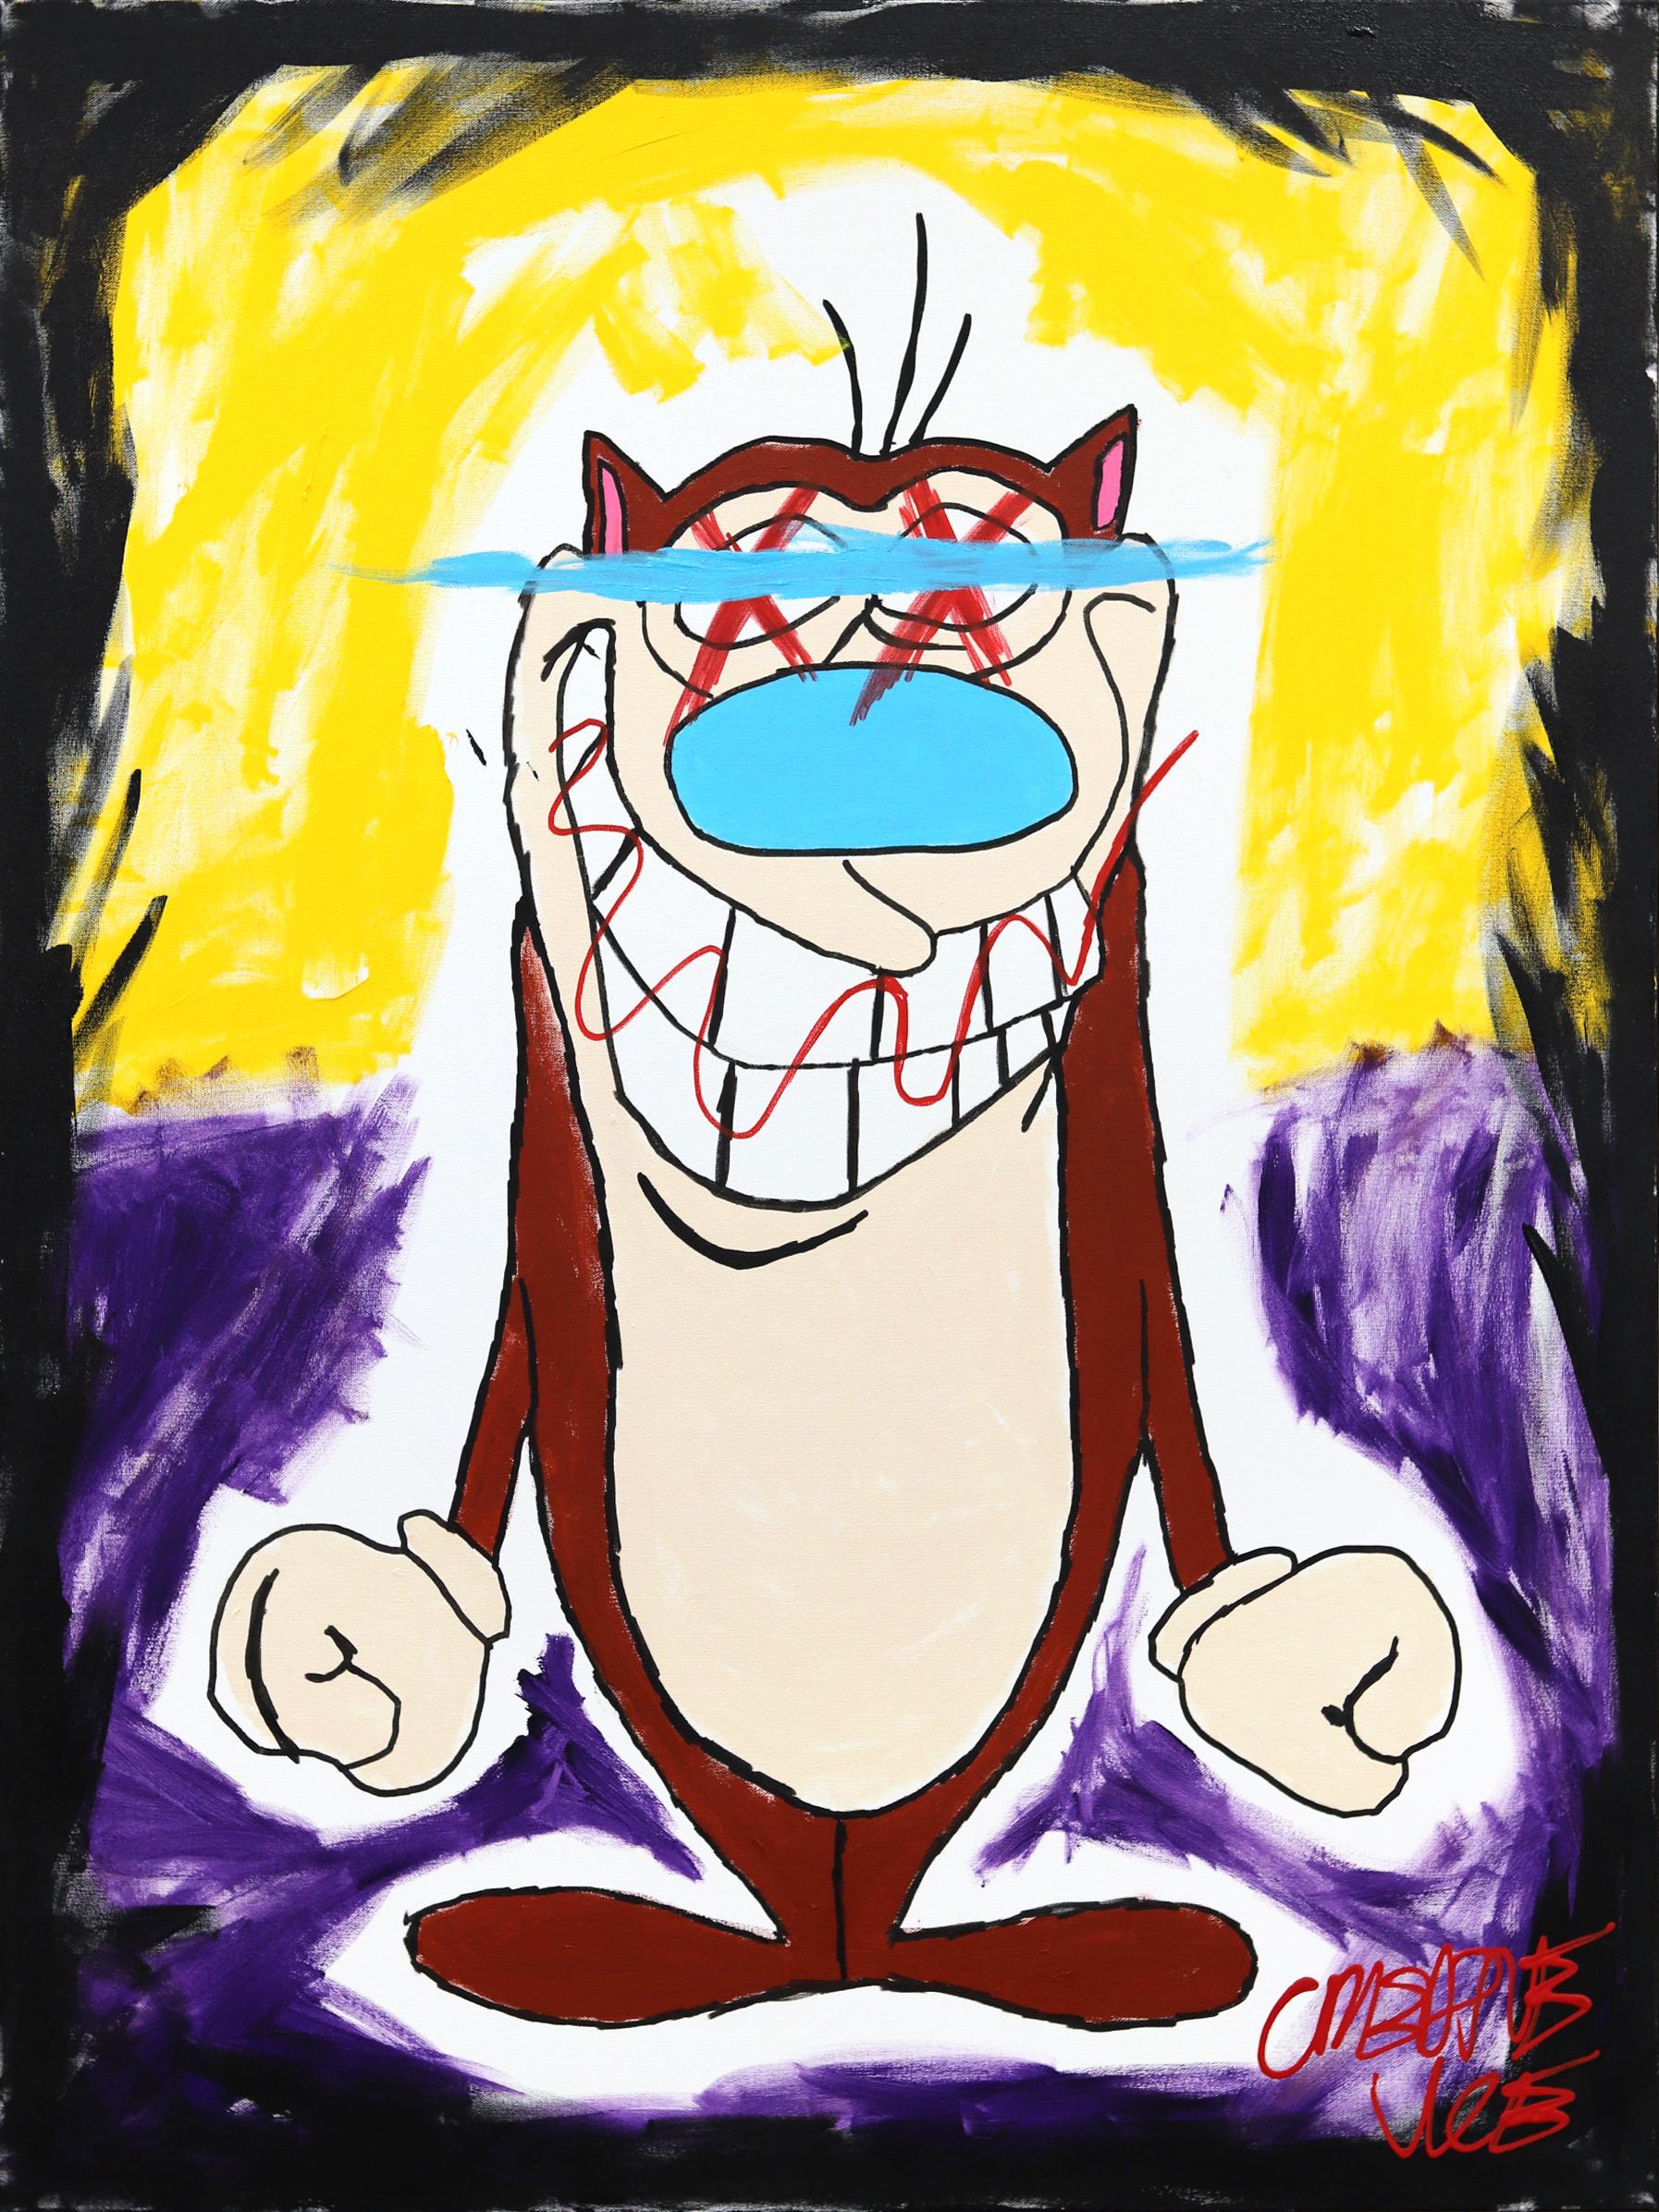 Randy Morales Figurative Painting - "Wubba Wubba" Pop Art inspired by Ren and Stimpy Colorful Cartoon Character